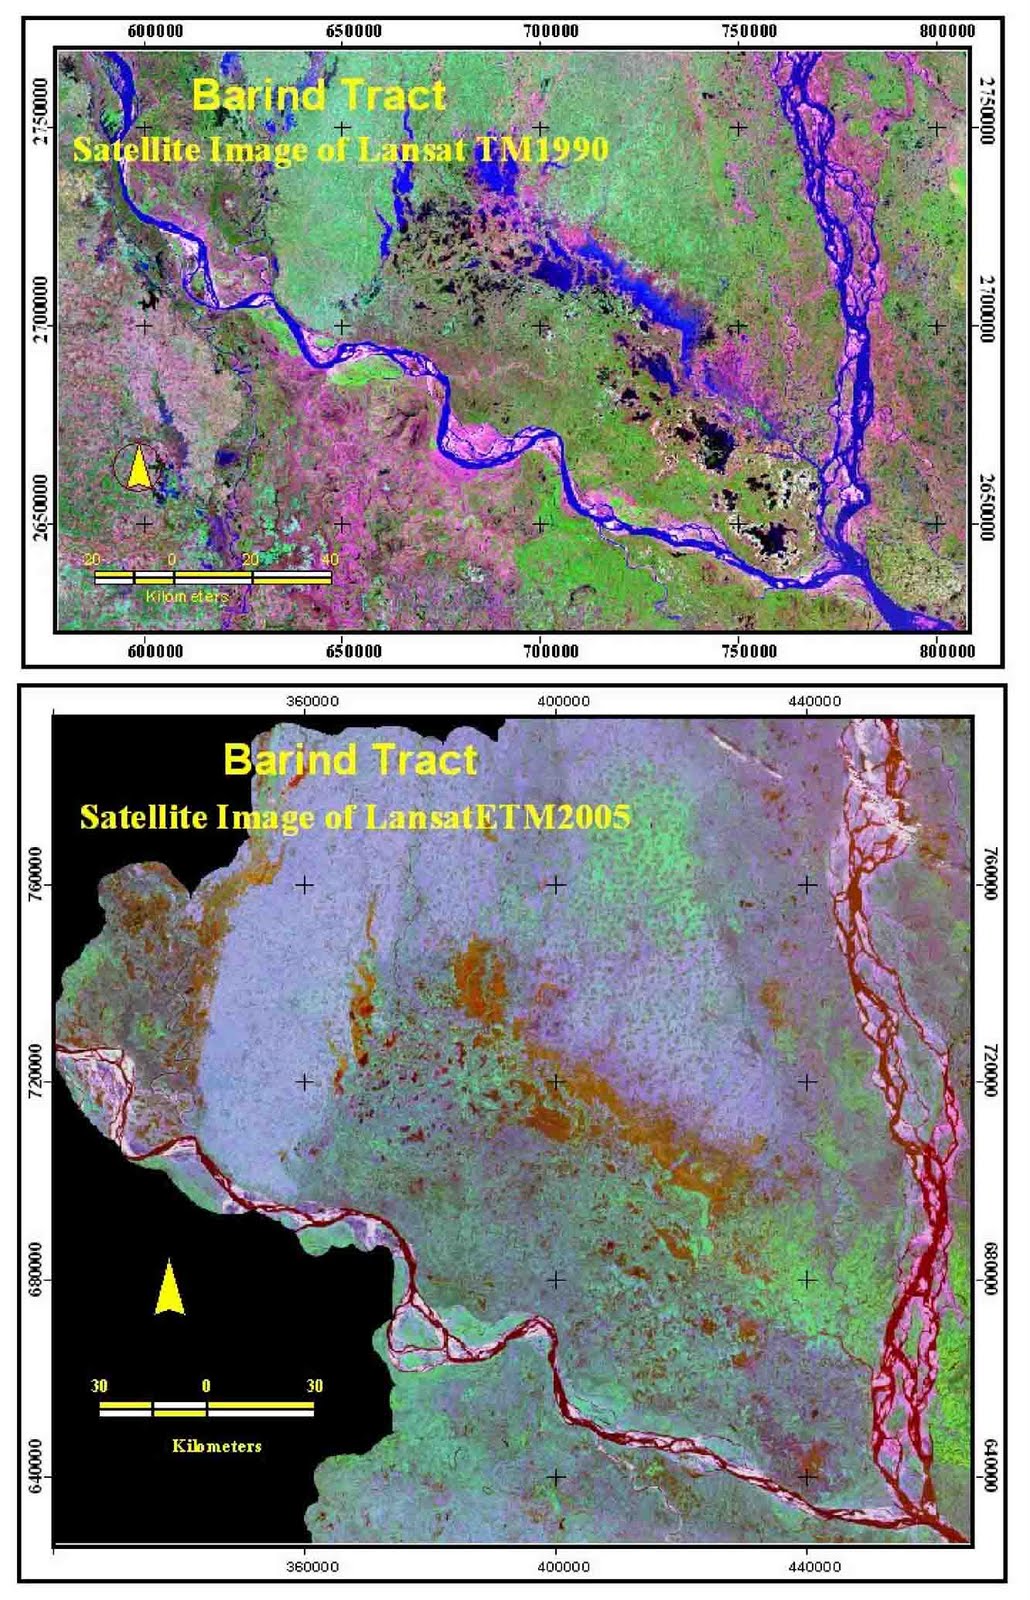 Figure: Satellite images showing the conditions of Drought in Barind Trac